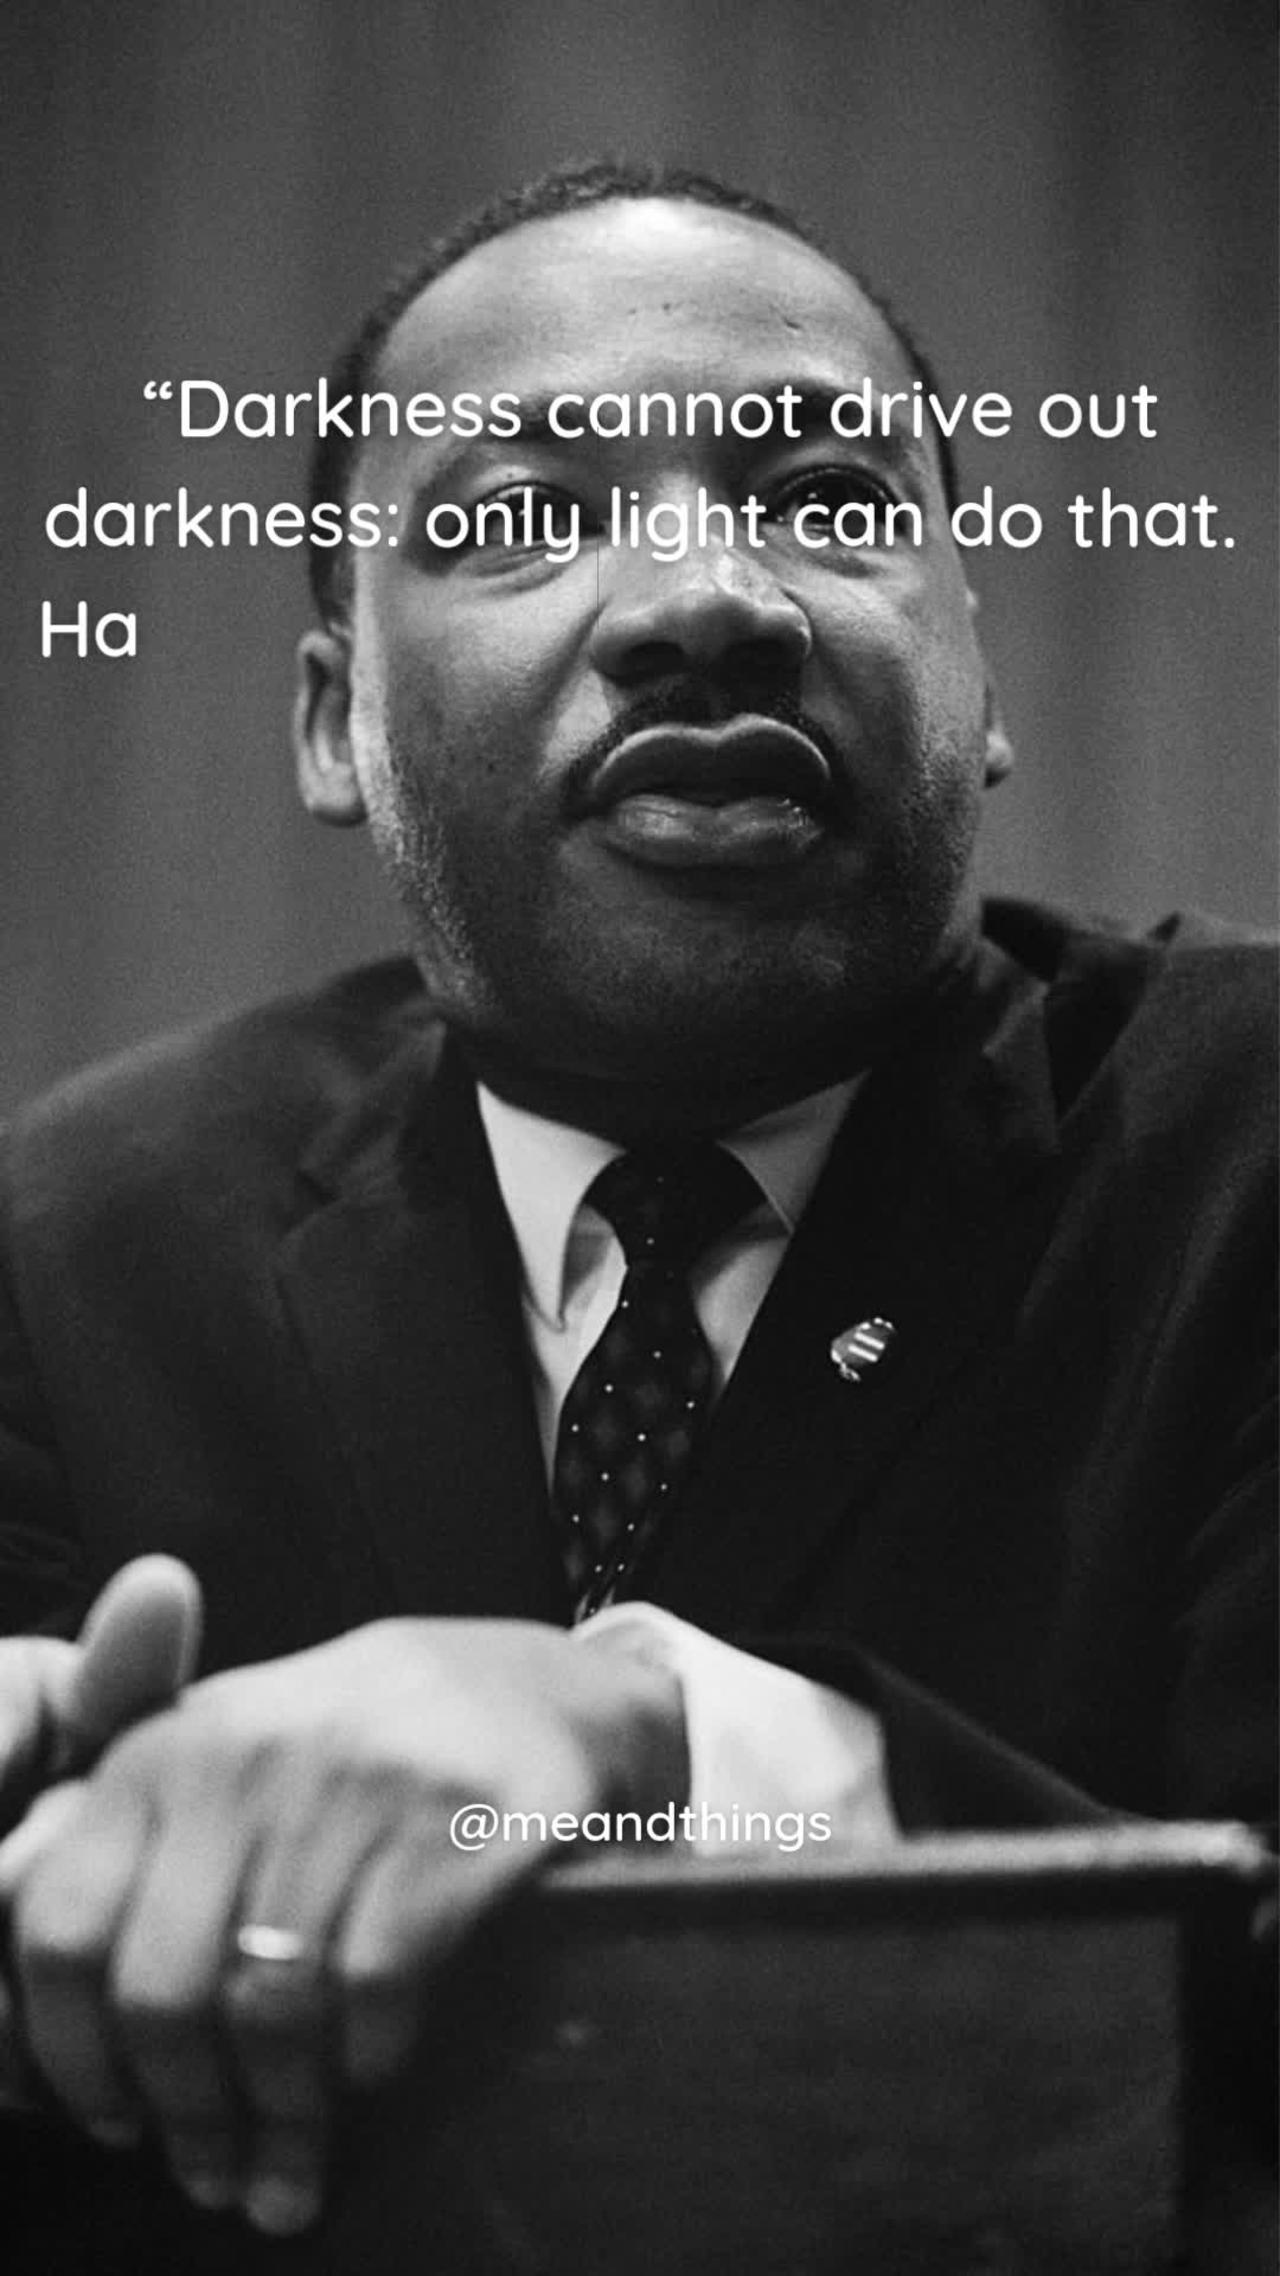 Quotes from Martin Luther King Jr